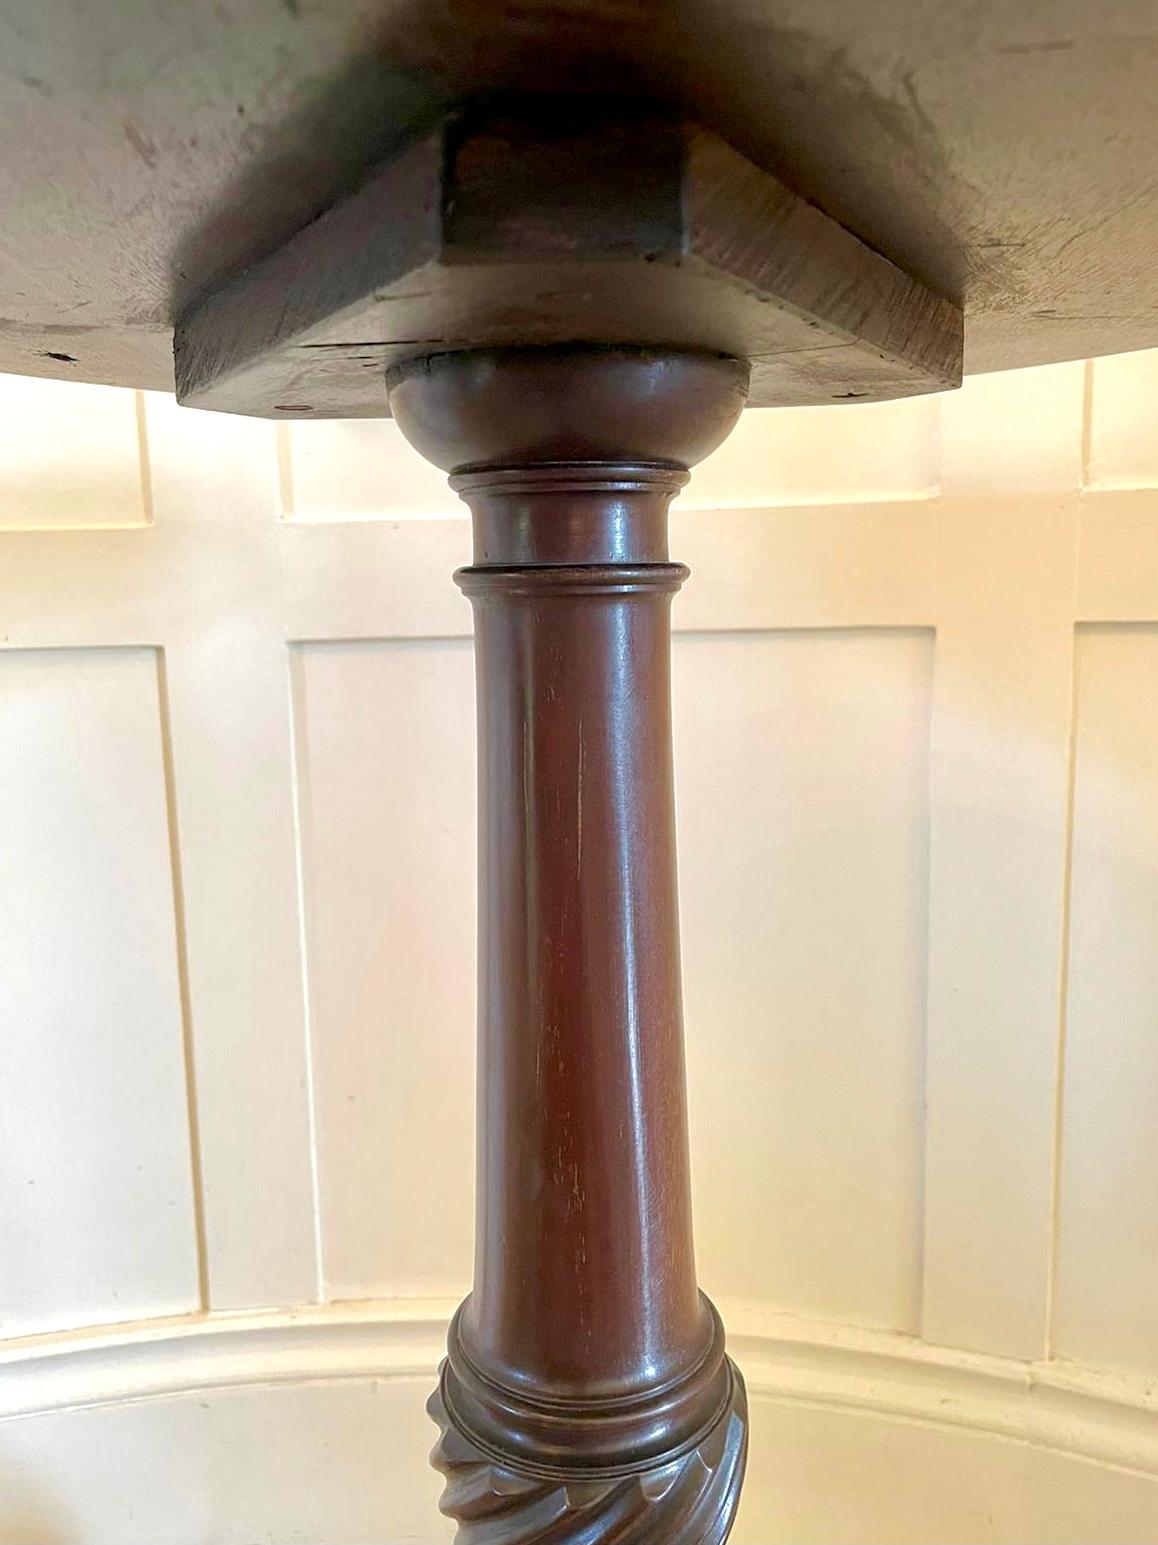 Quality antique George III mahogany wine table/kettle stand having a quality mahogany round top
raised on a lovely turned carved twisted column standing on expertly carved shaped cabriole legs with pad feet.

A very desirable piece in splendid